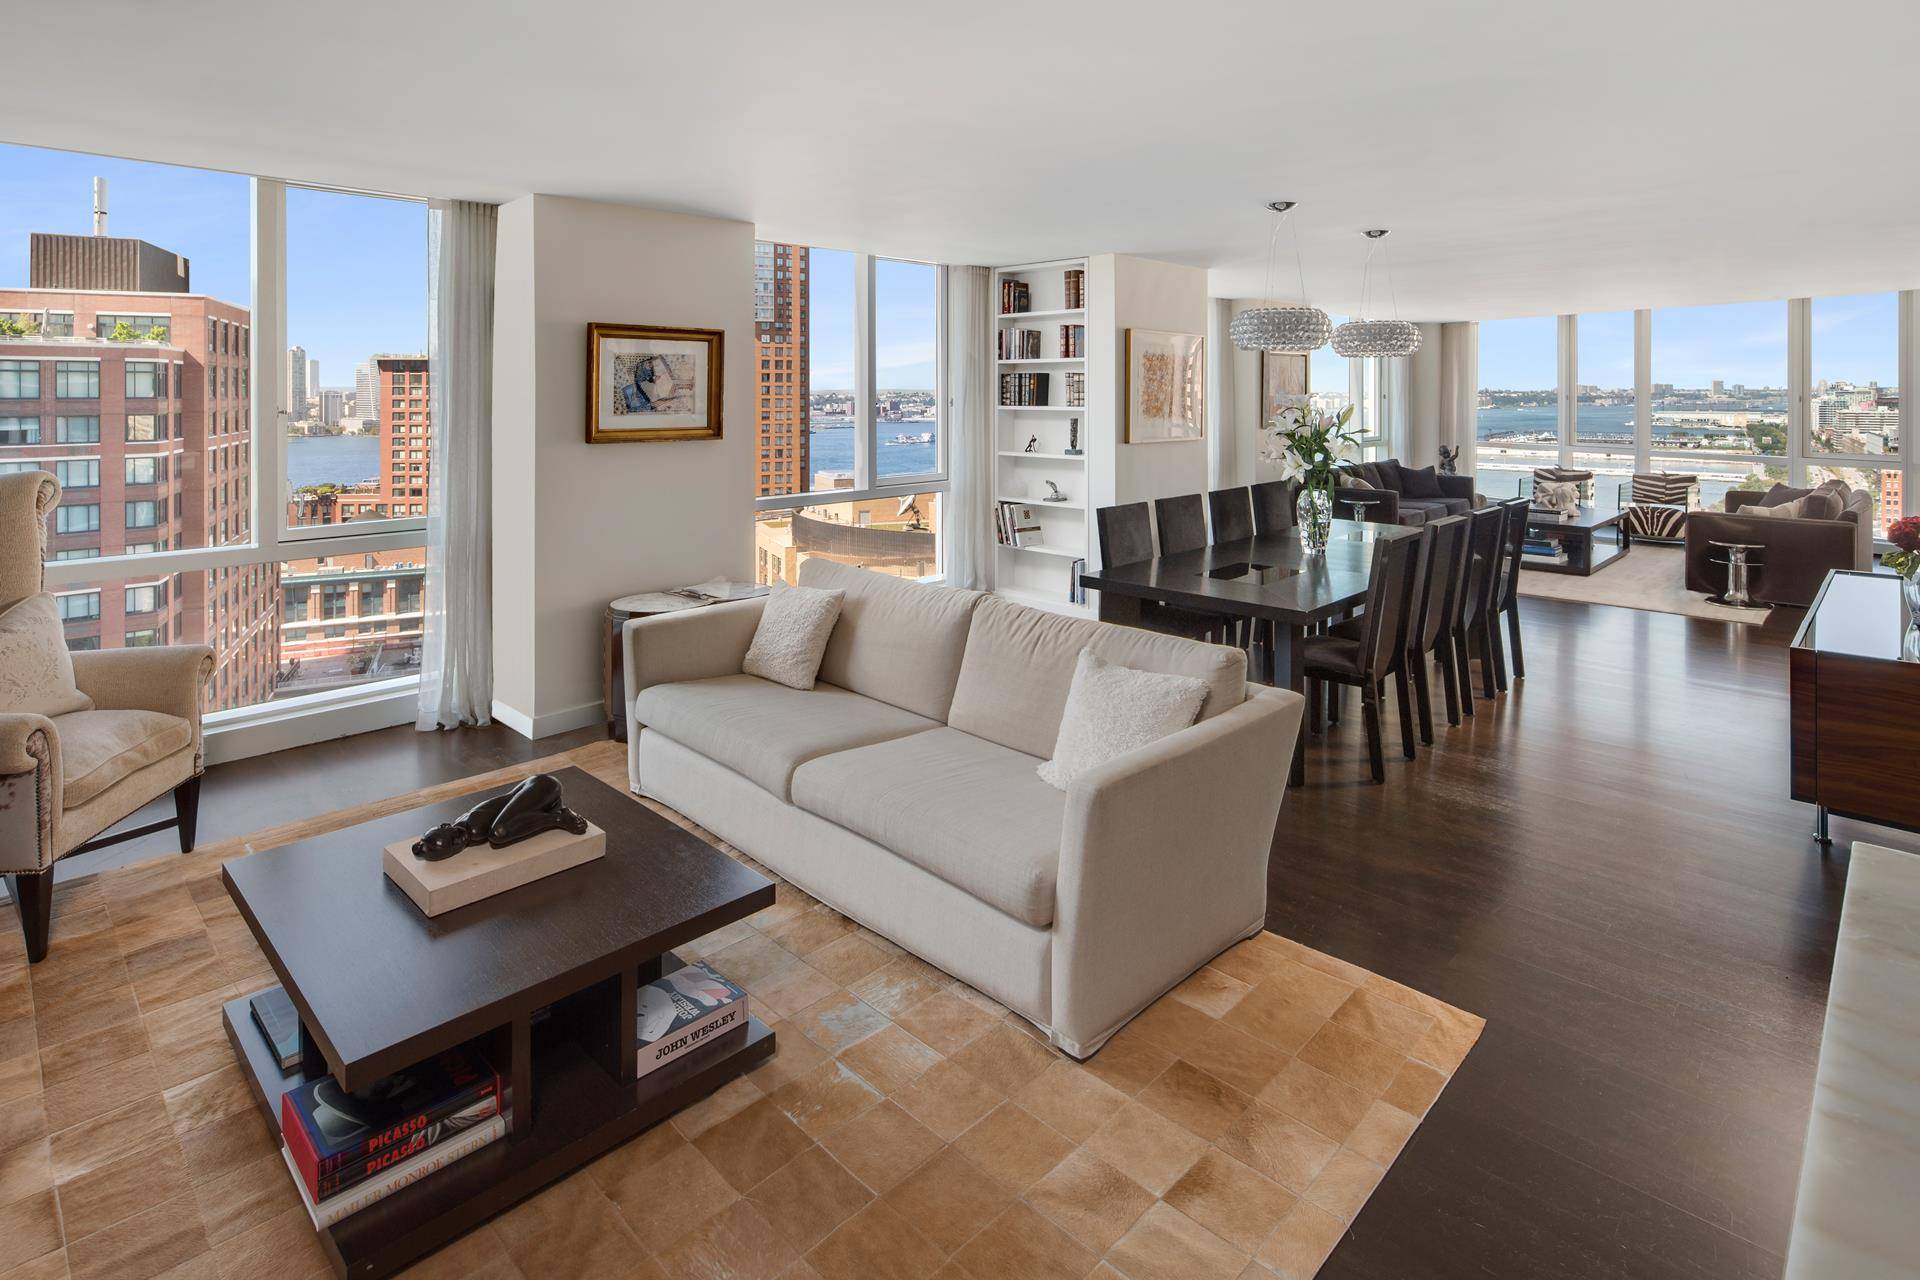 Panoramic views of the Hudson River, lower Manhattan and far beyond !